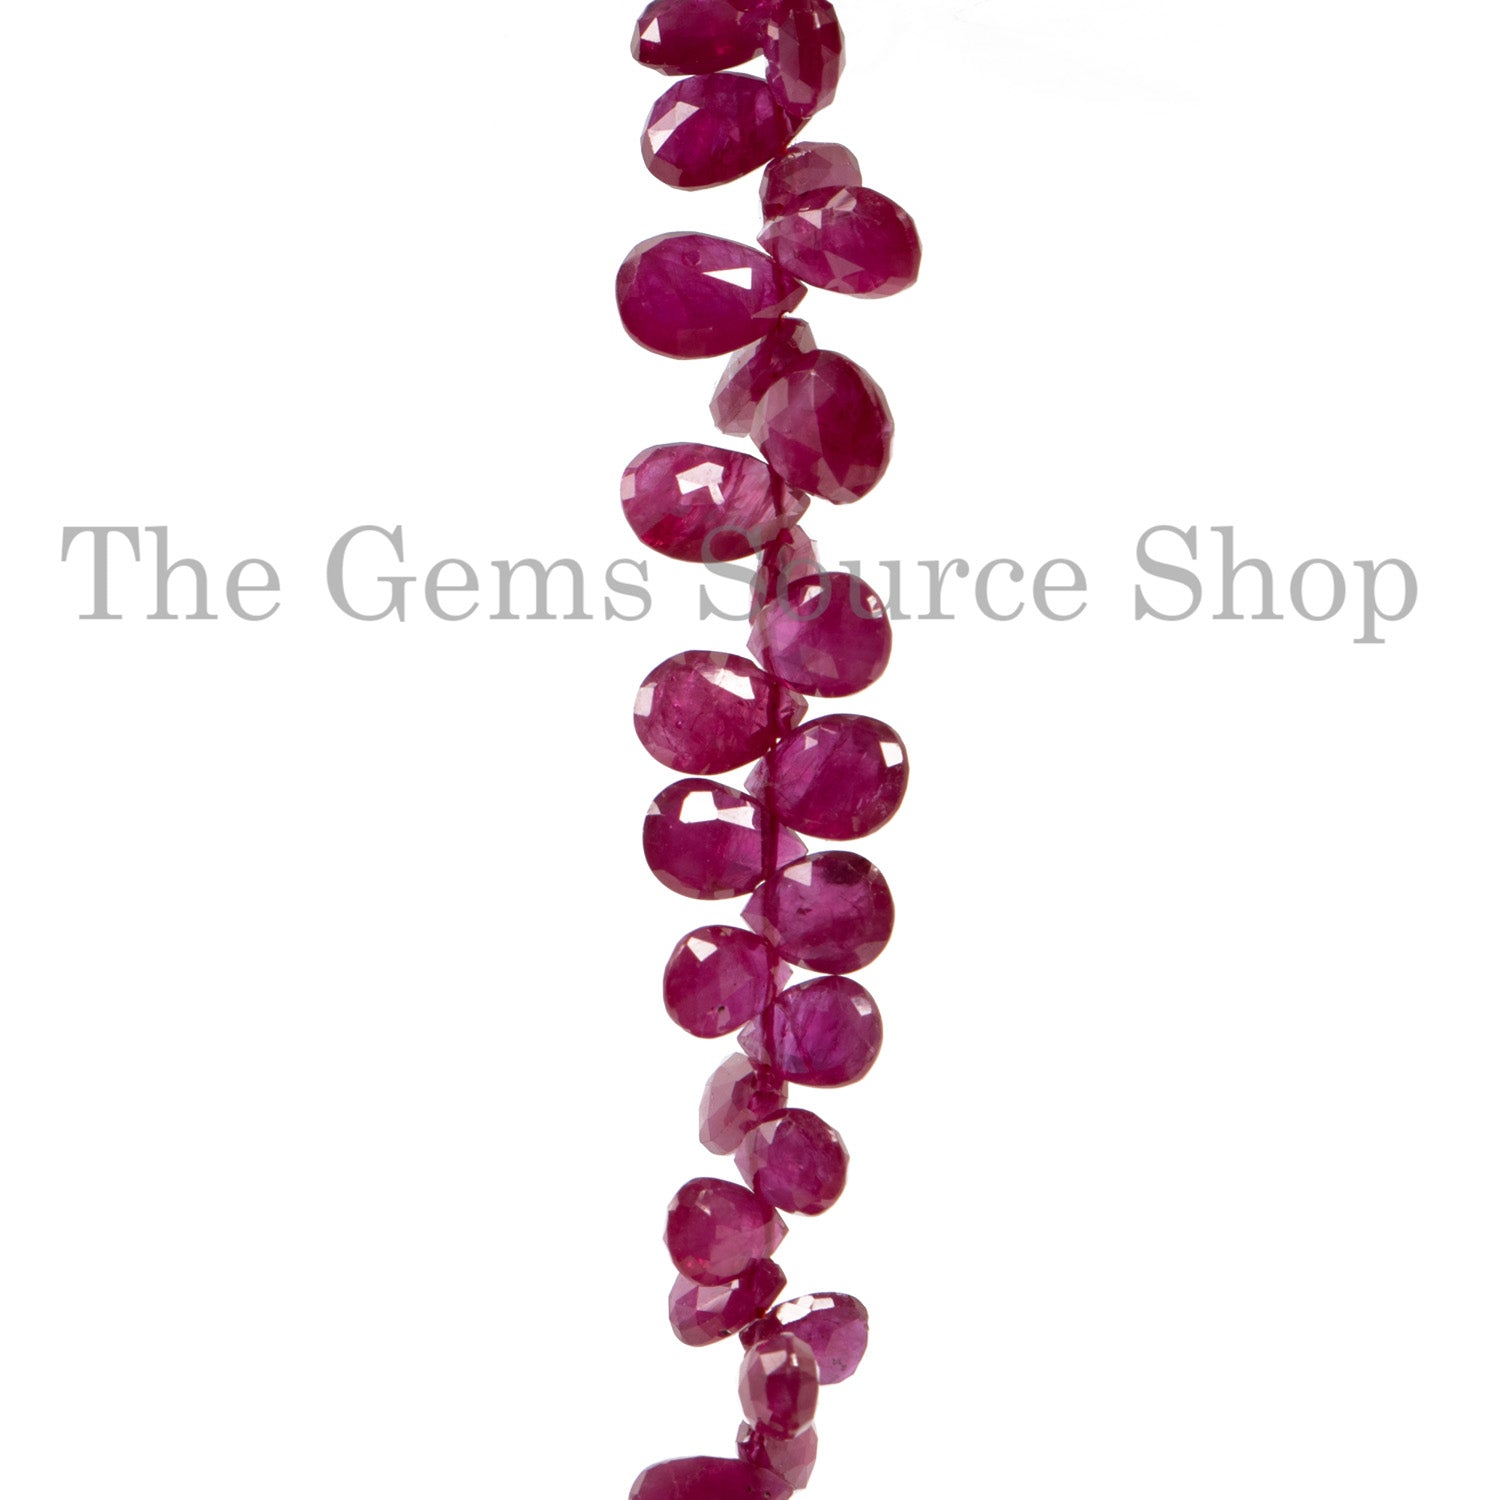 Super Top Quality Burma Ruby Beads, Natural Faceted Pear Shape Beads, Briolette Beads